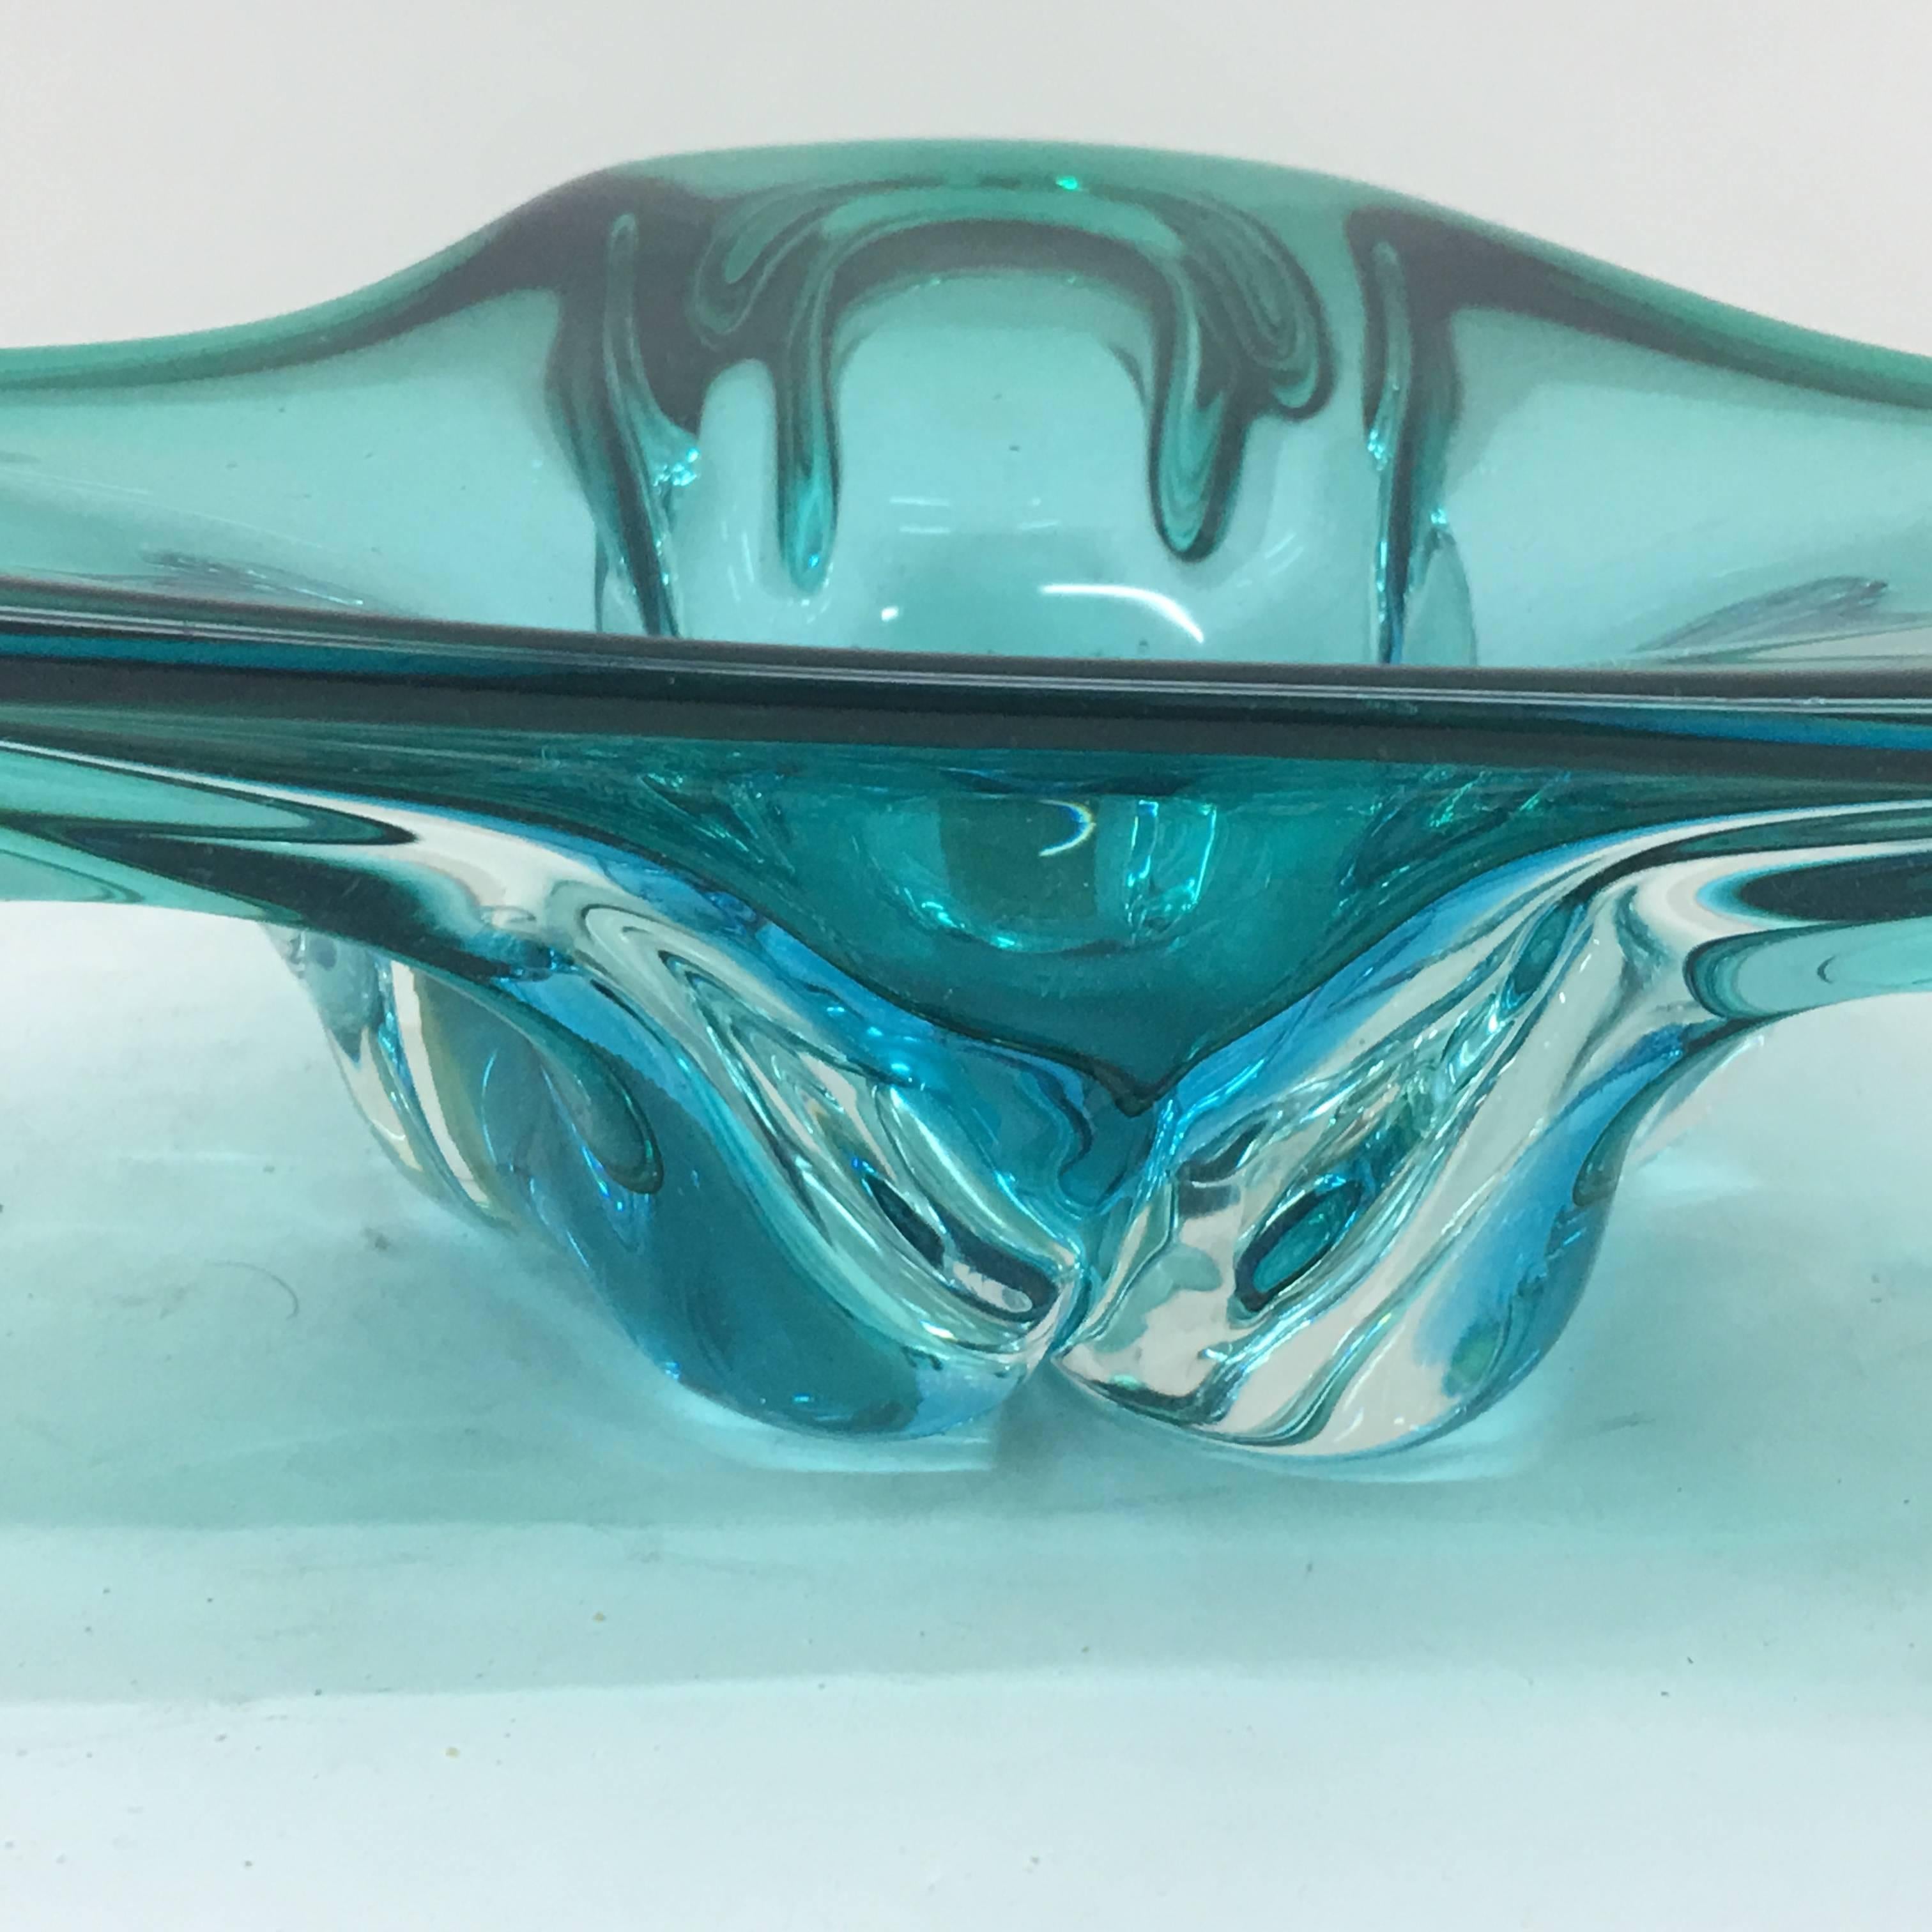 Hand-Crafted Vintage Submerged Murano Glass Ashtray, circa 1970